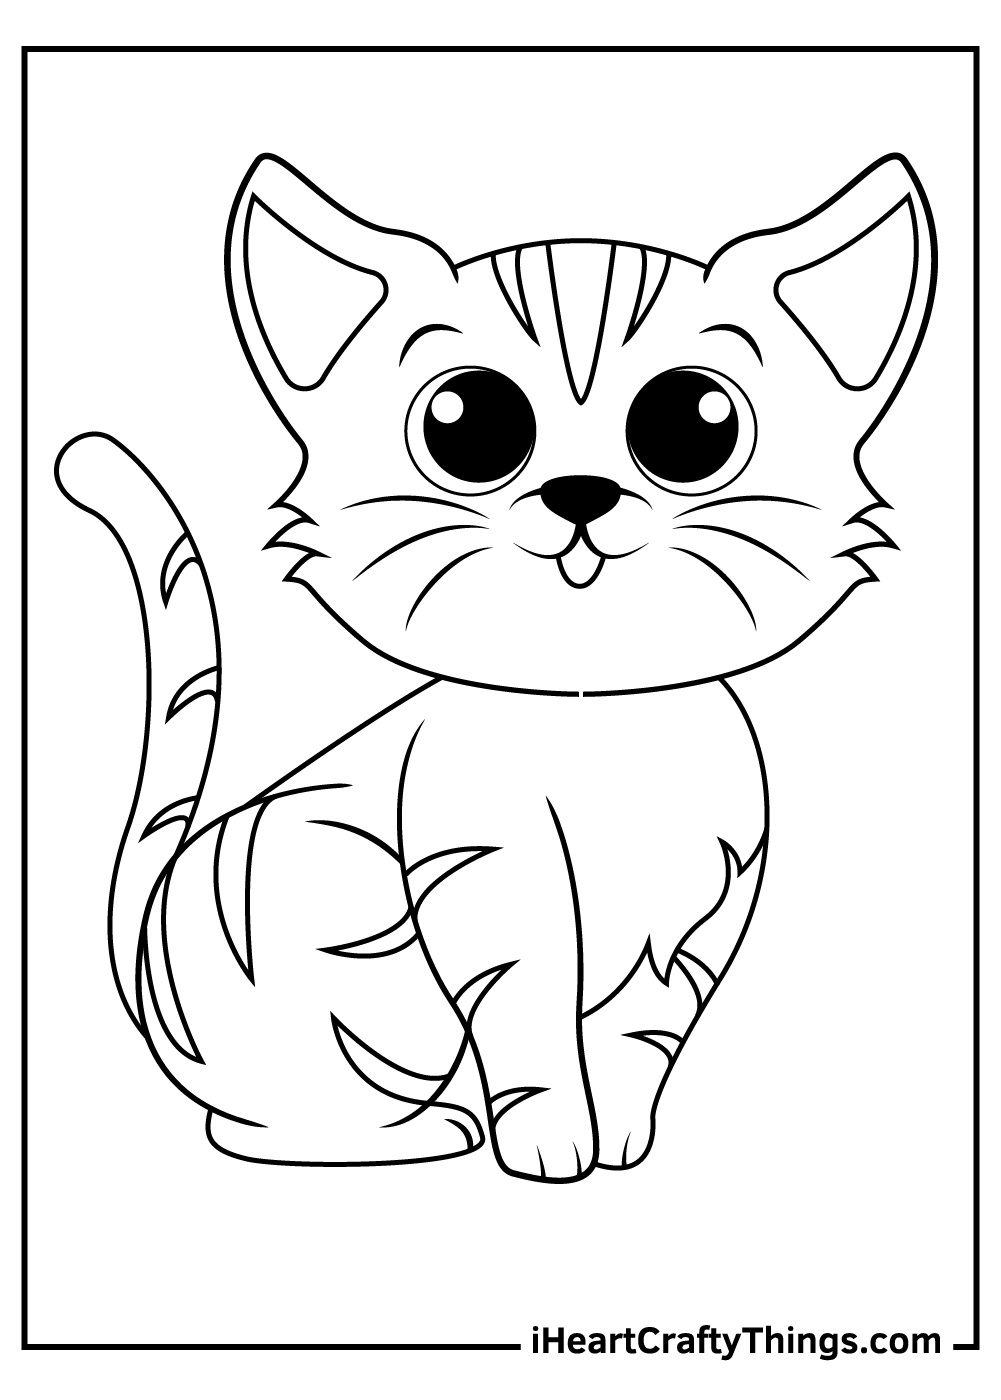 Cute Kitten Coloring Pages Updated 2021 